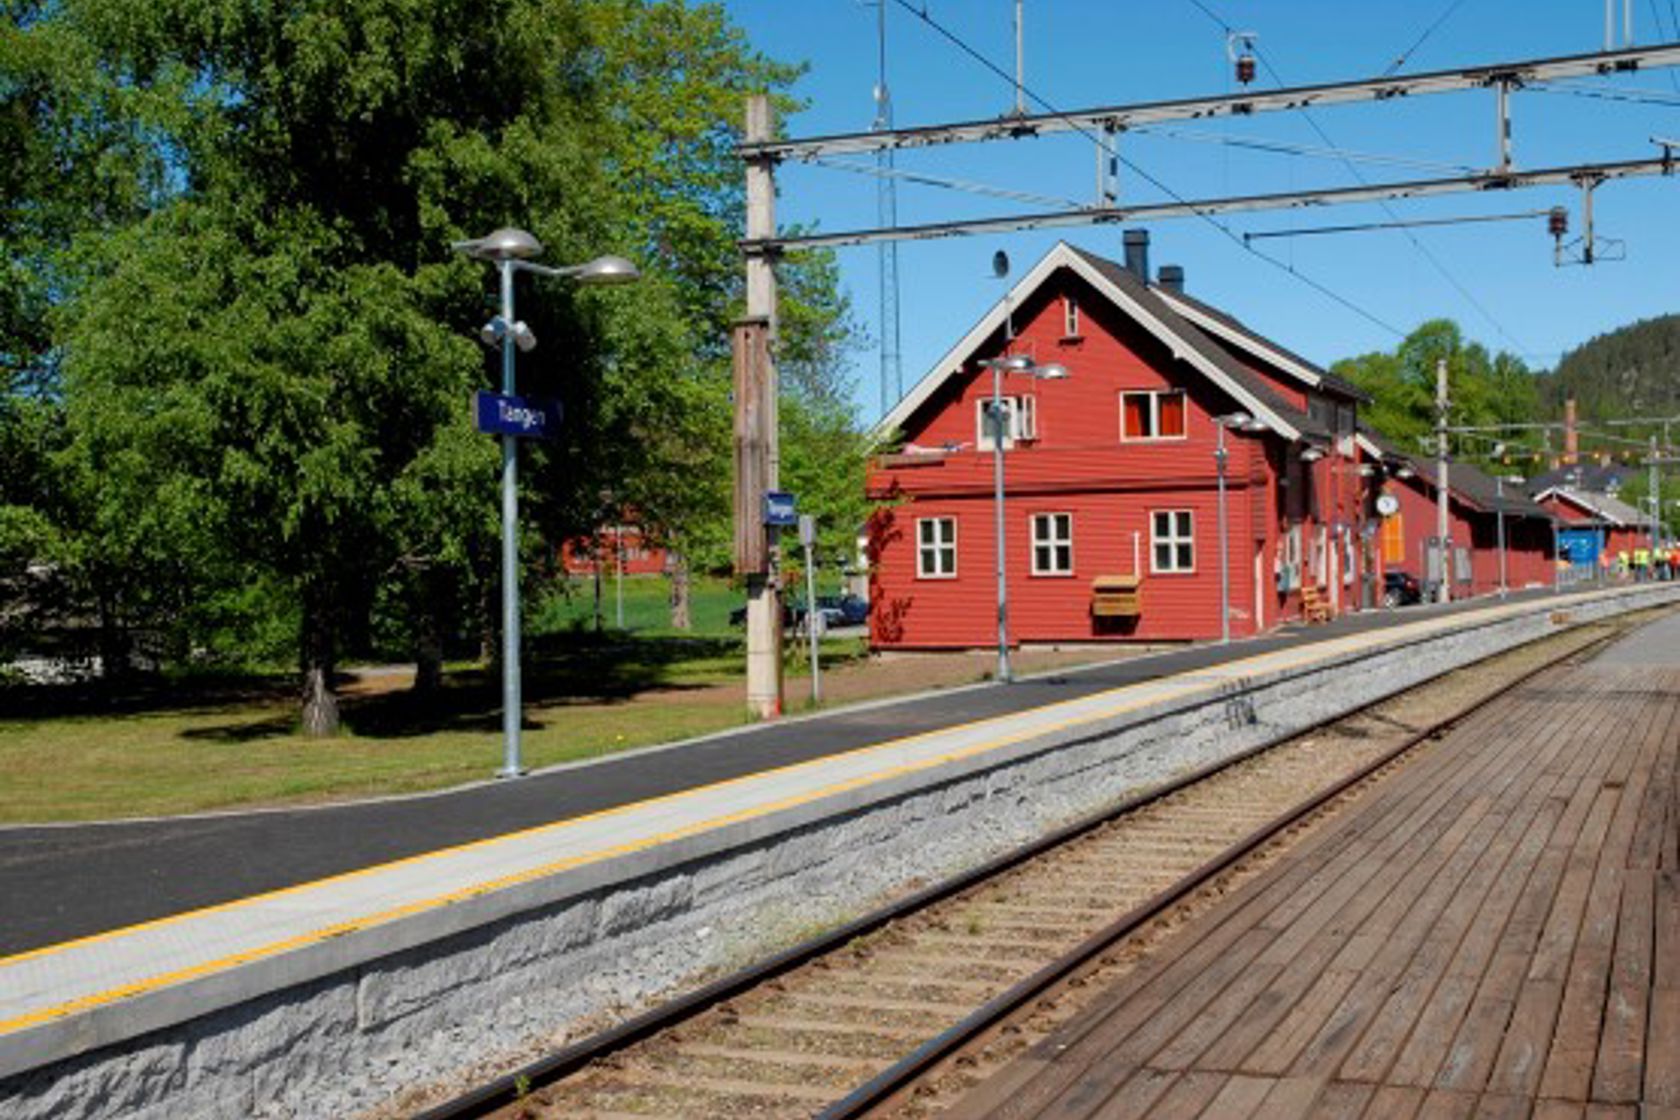 Exterior view of Tangen station